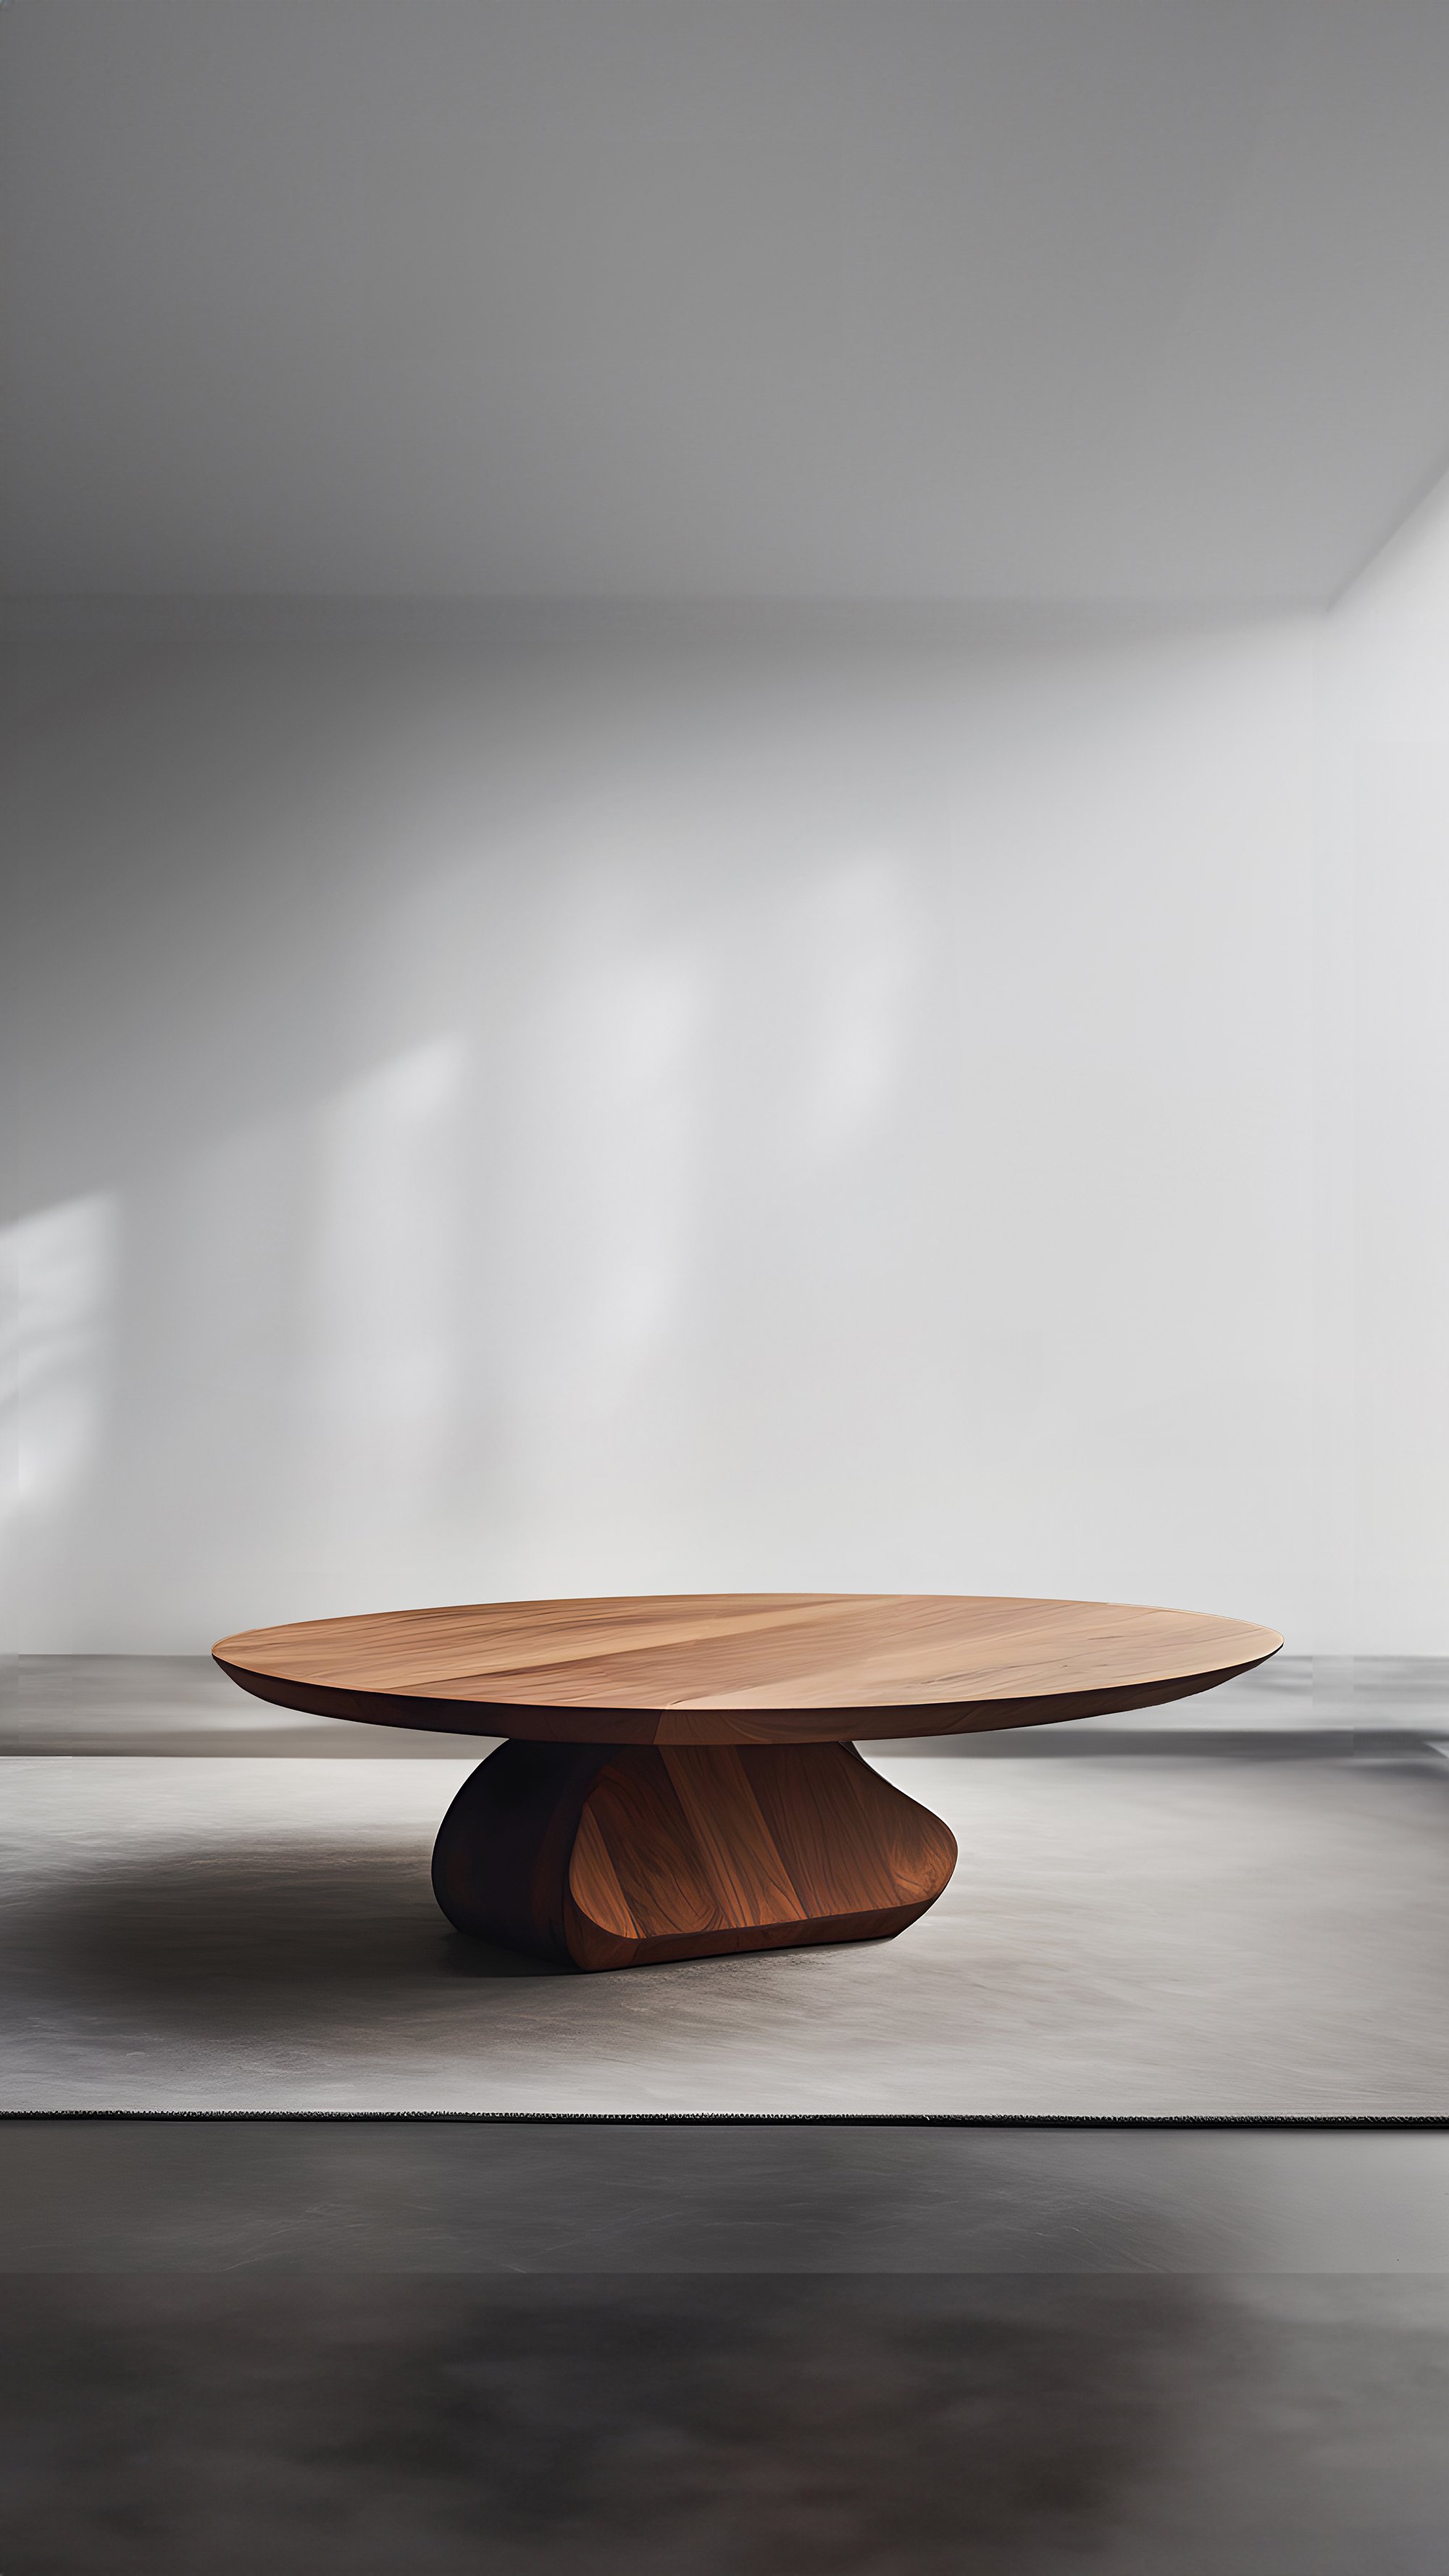 Sculptural Coffee Table Made of Solid Wood, Center Table Solace S46 by Joel Escalona — 5.jpg